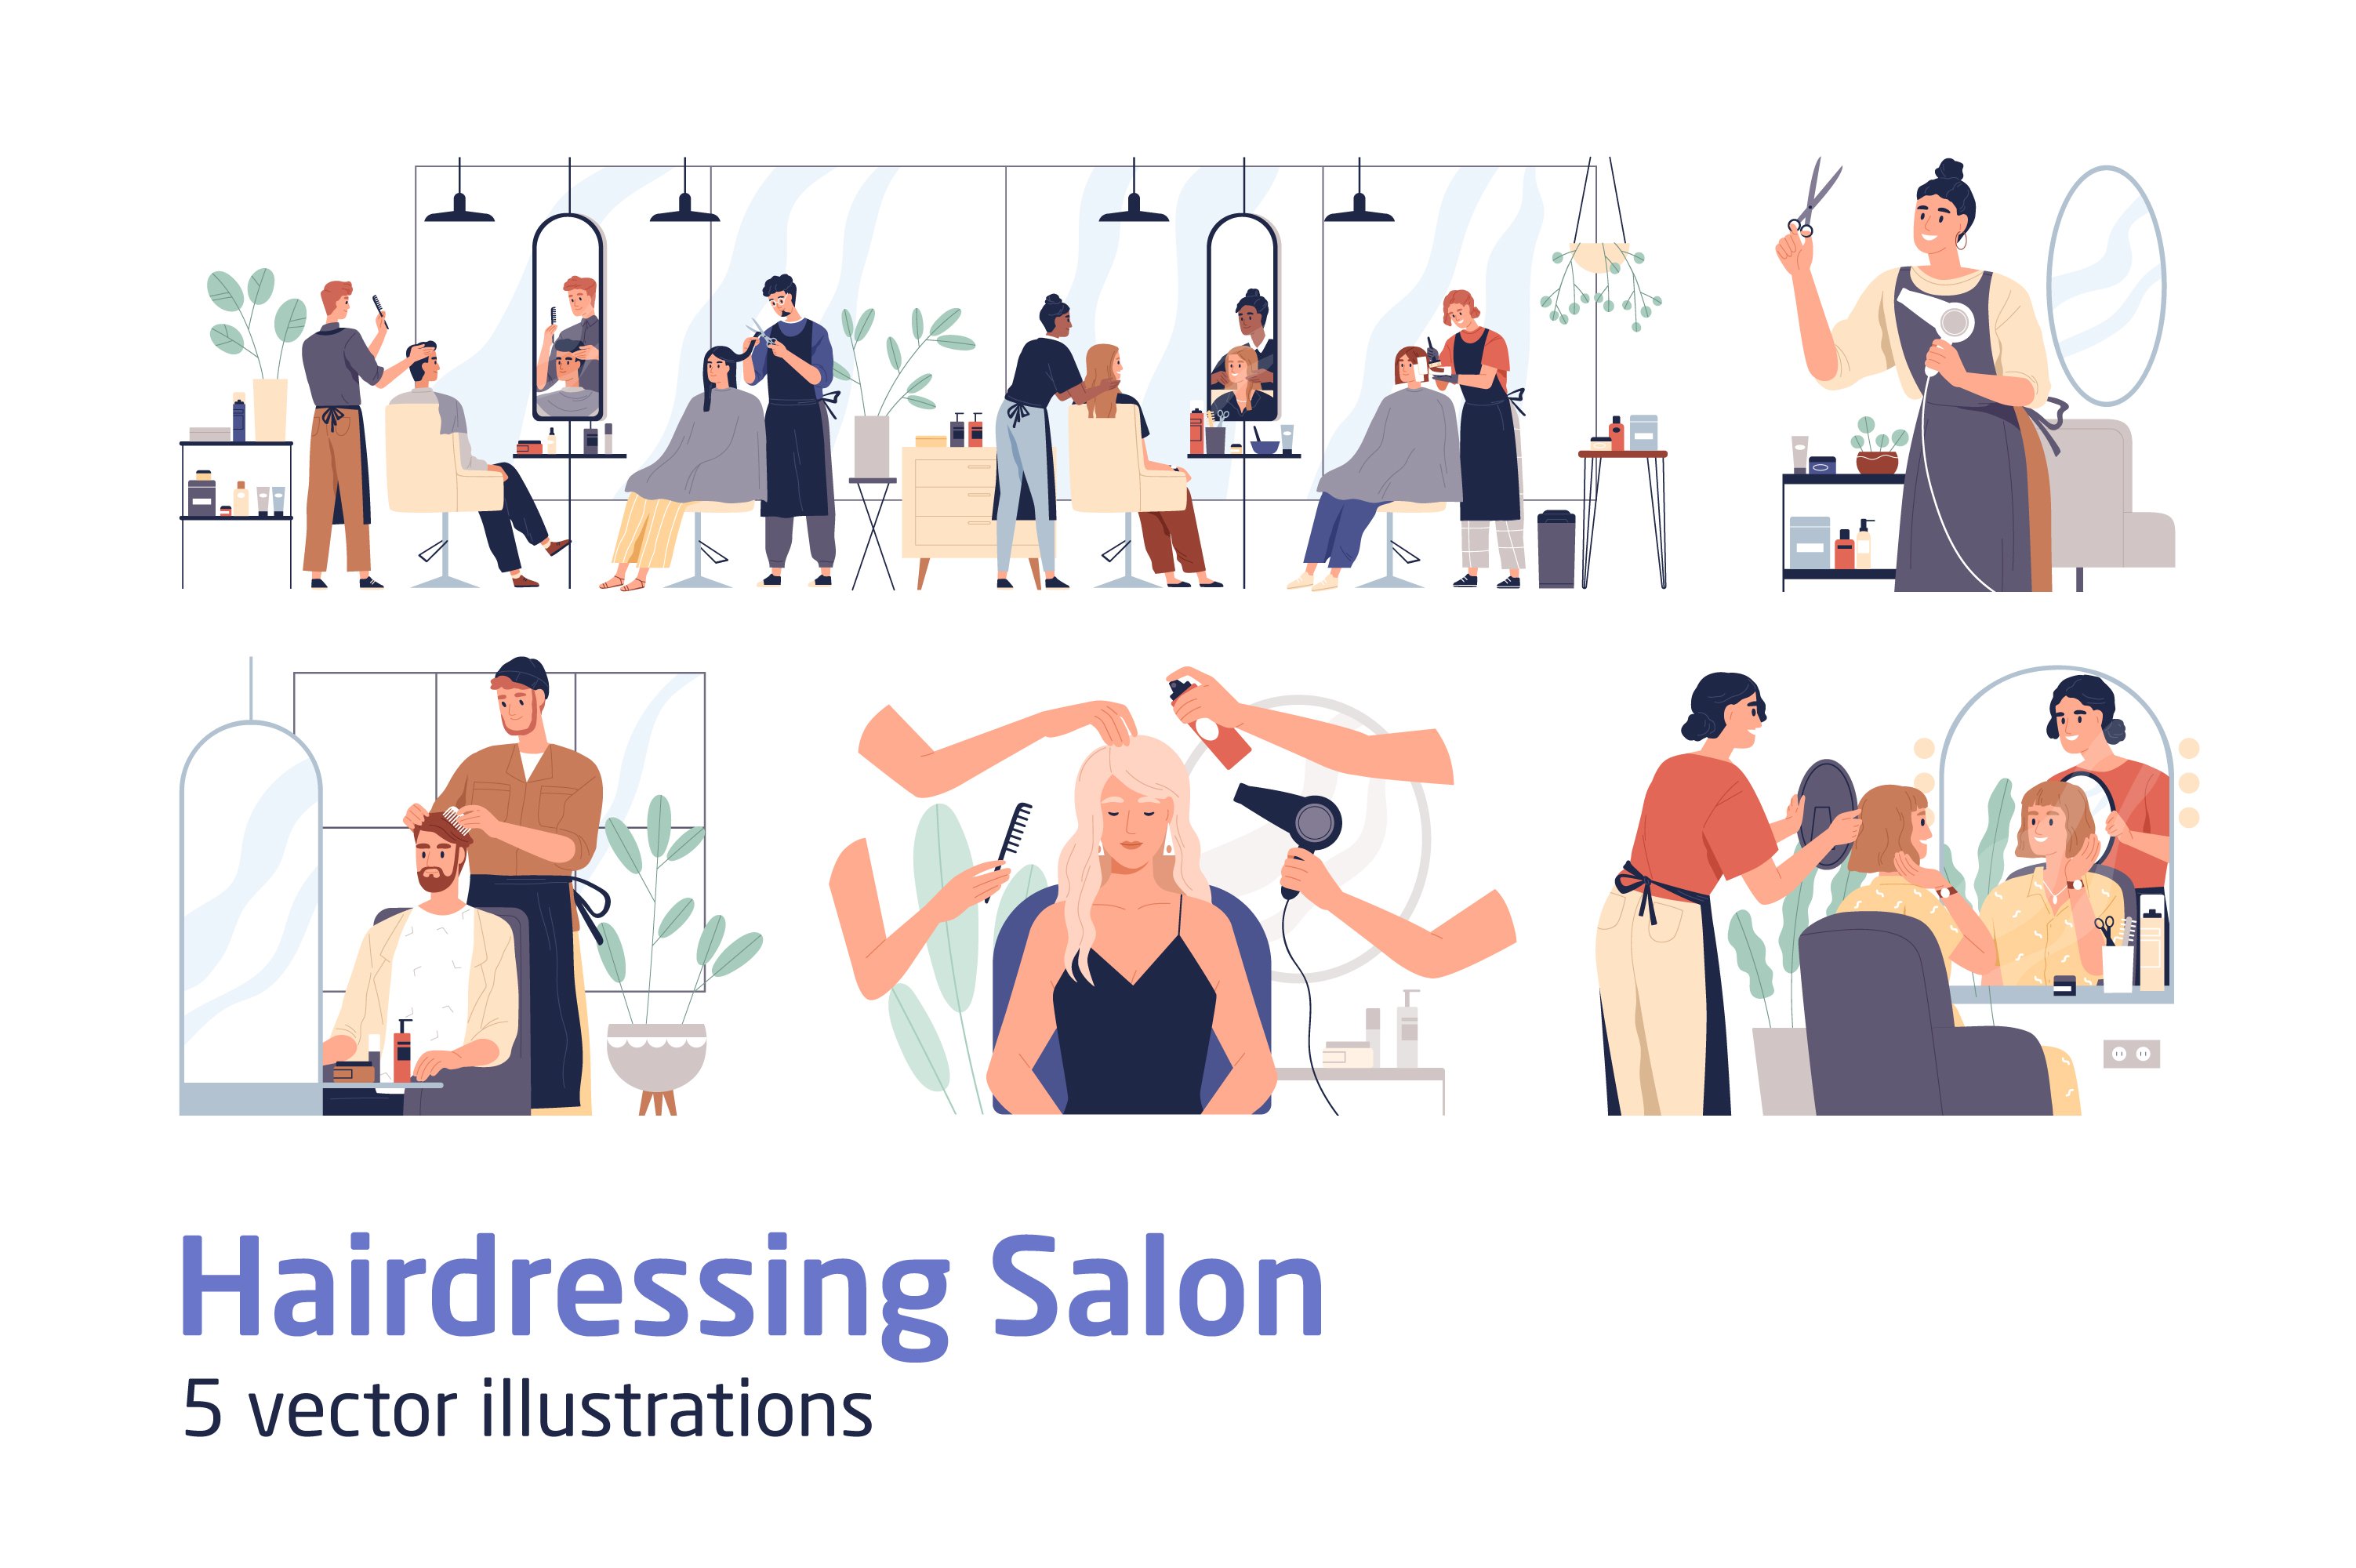 Hair dressers, barbers work in salon cover image.